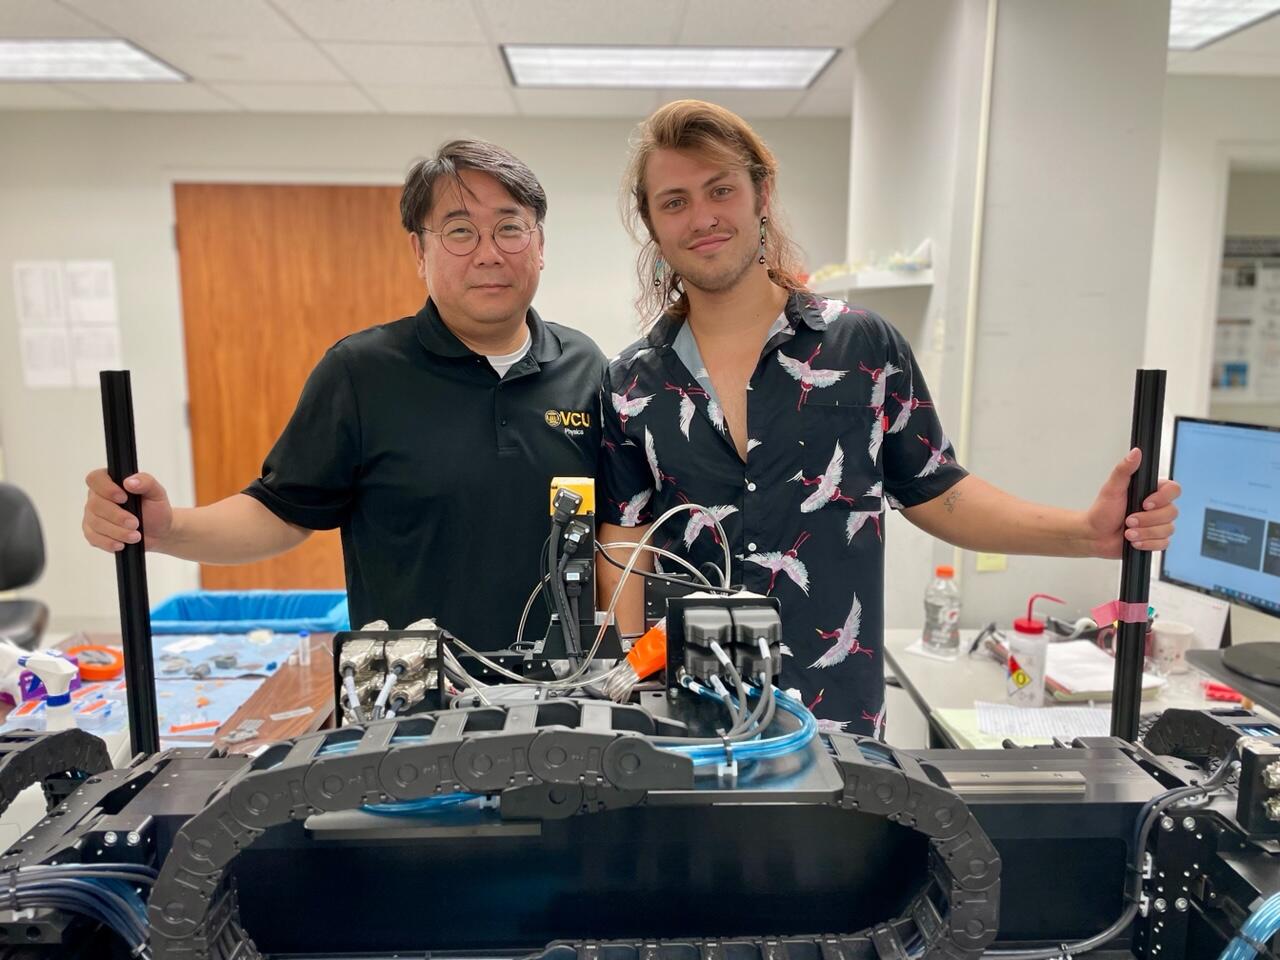 A photo of two men standing next to each other in front of testing equipment